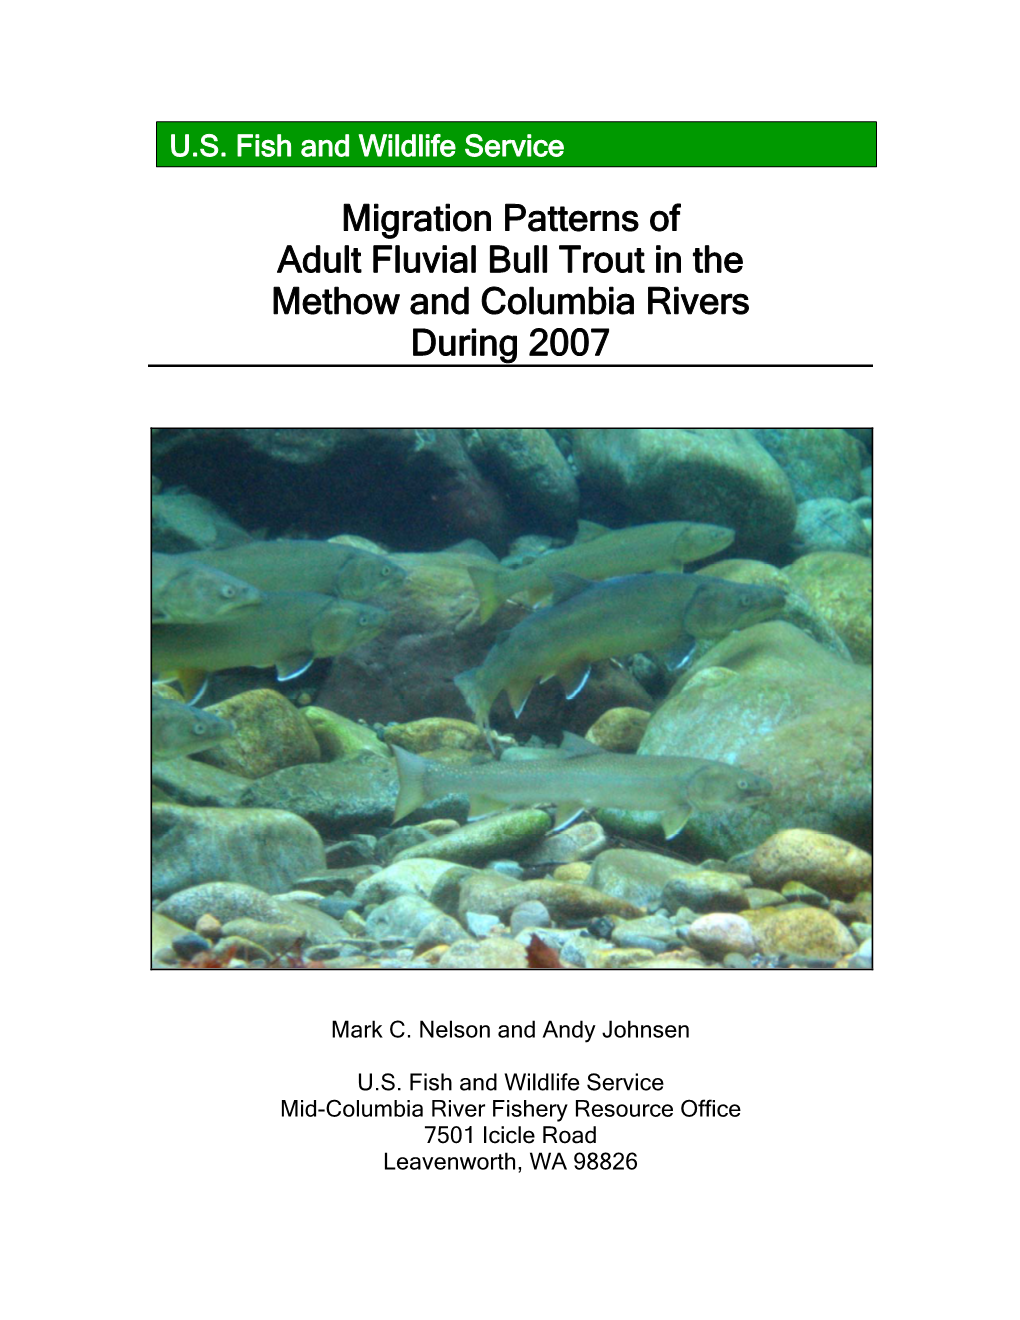 Migration Patterns of Adult Fluvial Bull Trout in the Methow and Columbia Rivers During 2007